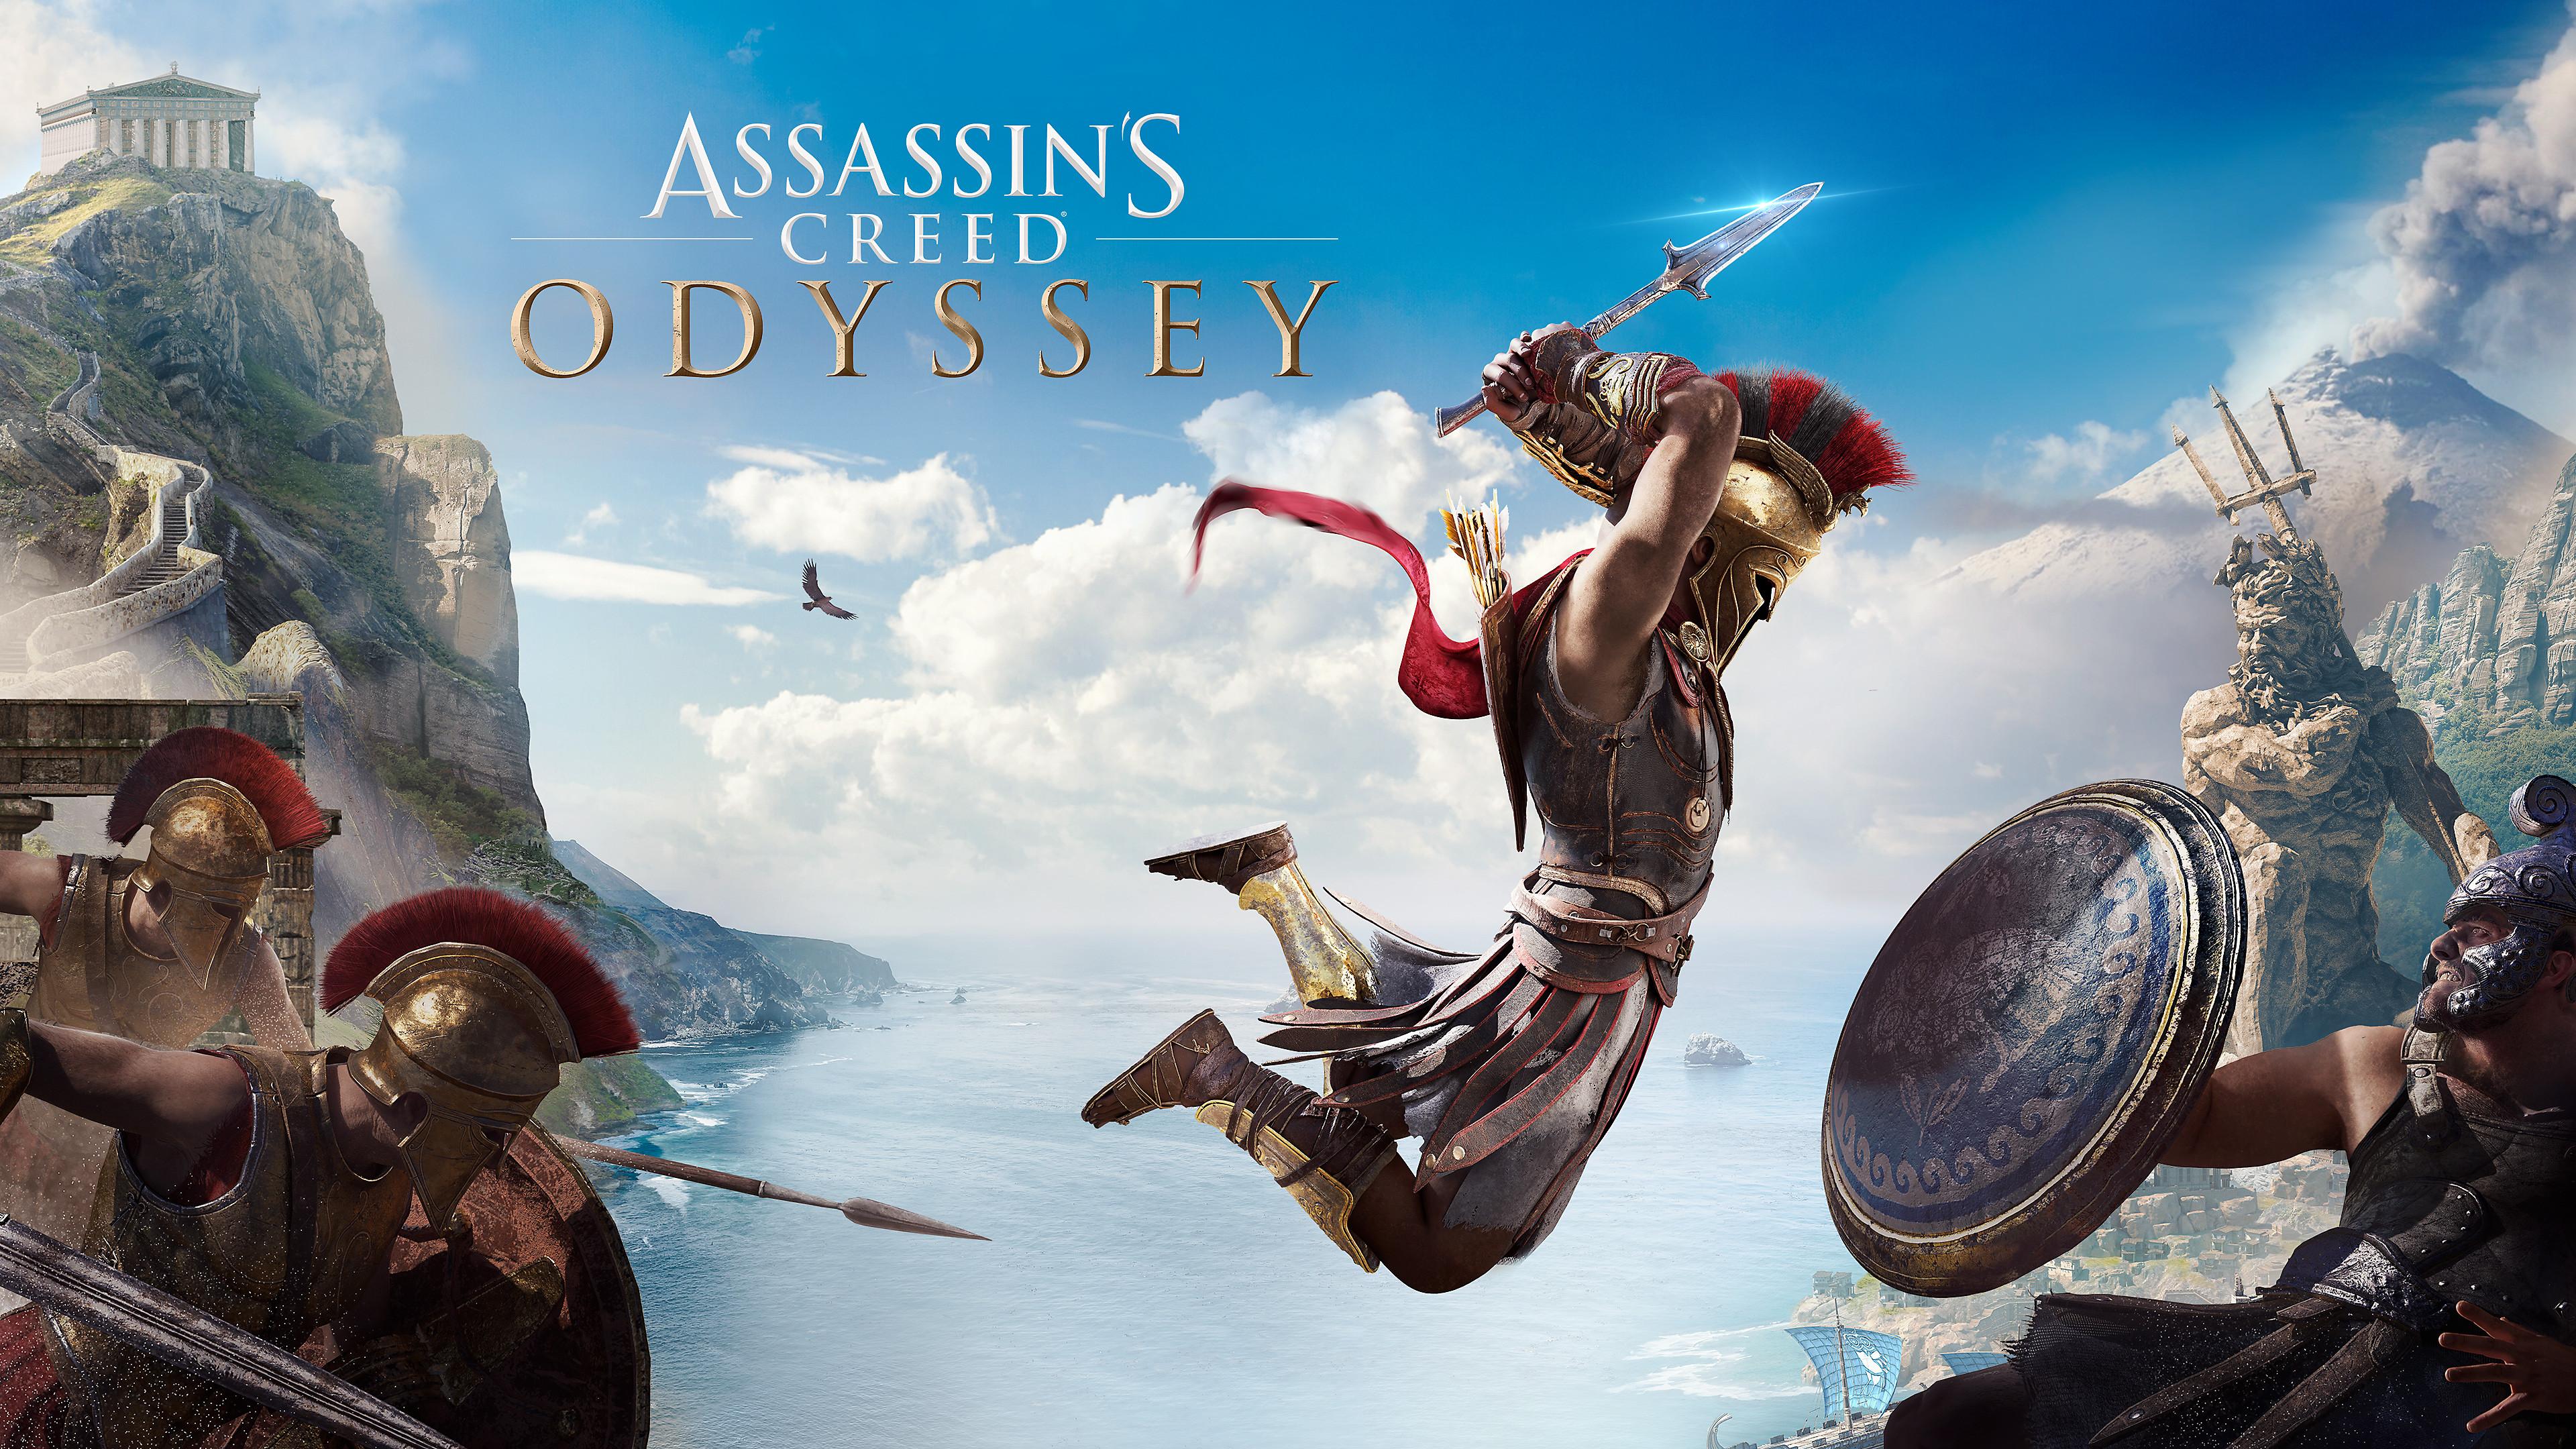 68 Assassin's Creed Odyssey Wallpapers